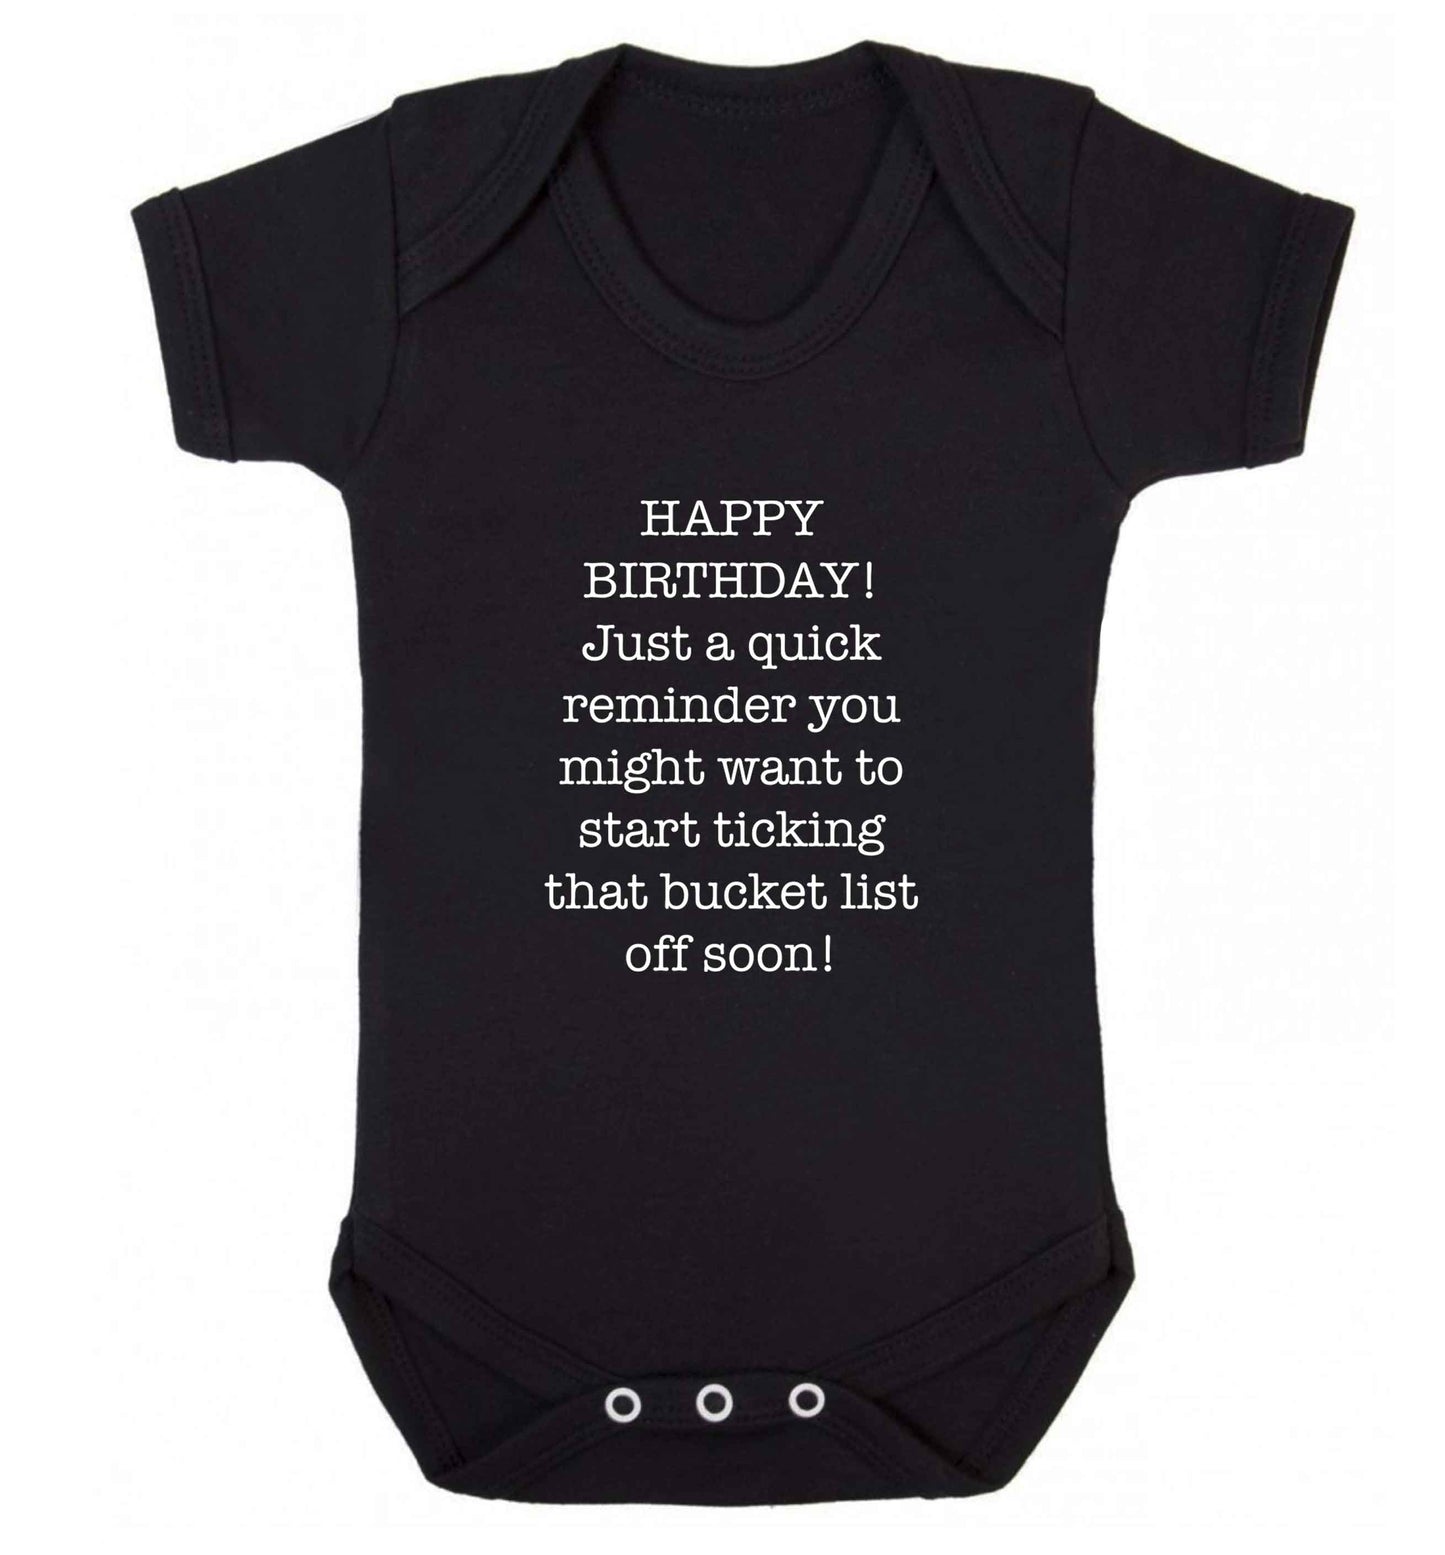 Happy birthday, just a quick reminder you might want to start ticking that bucket list off soon baby vest black 18-24 months